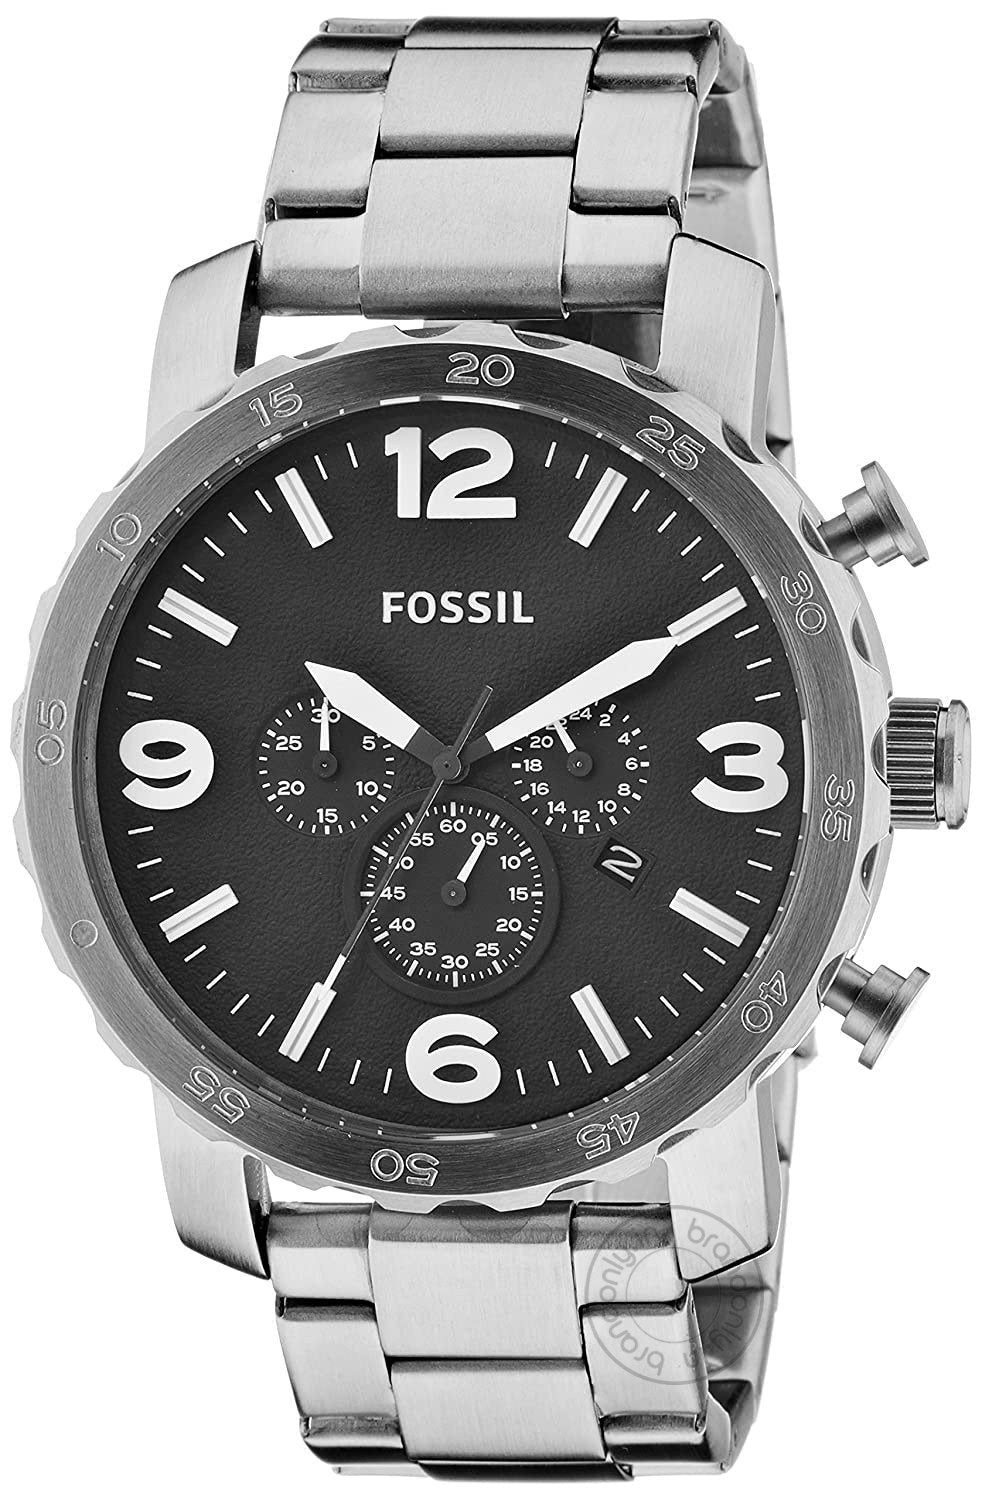 Fossil Chronograph Silver Steel Black Dial Men's Watch For Man Metal Casual Formal Gift Jr1353